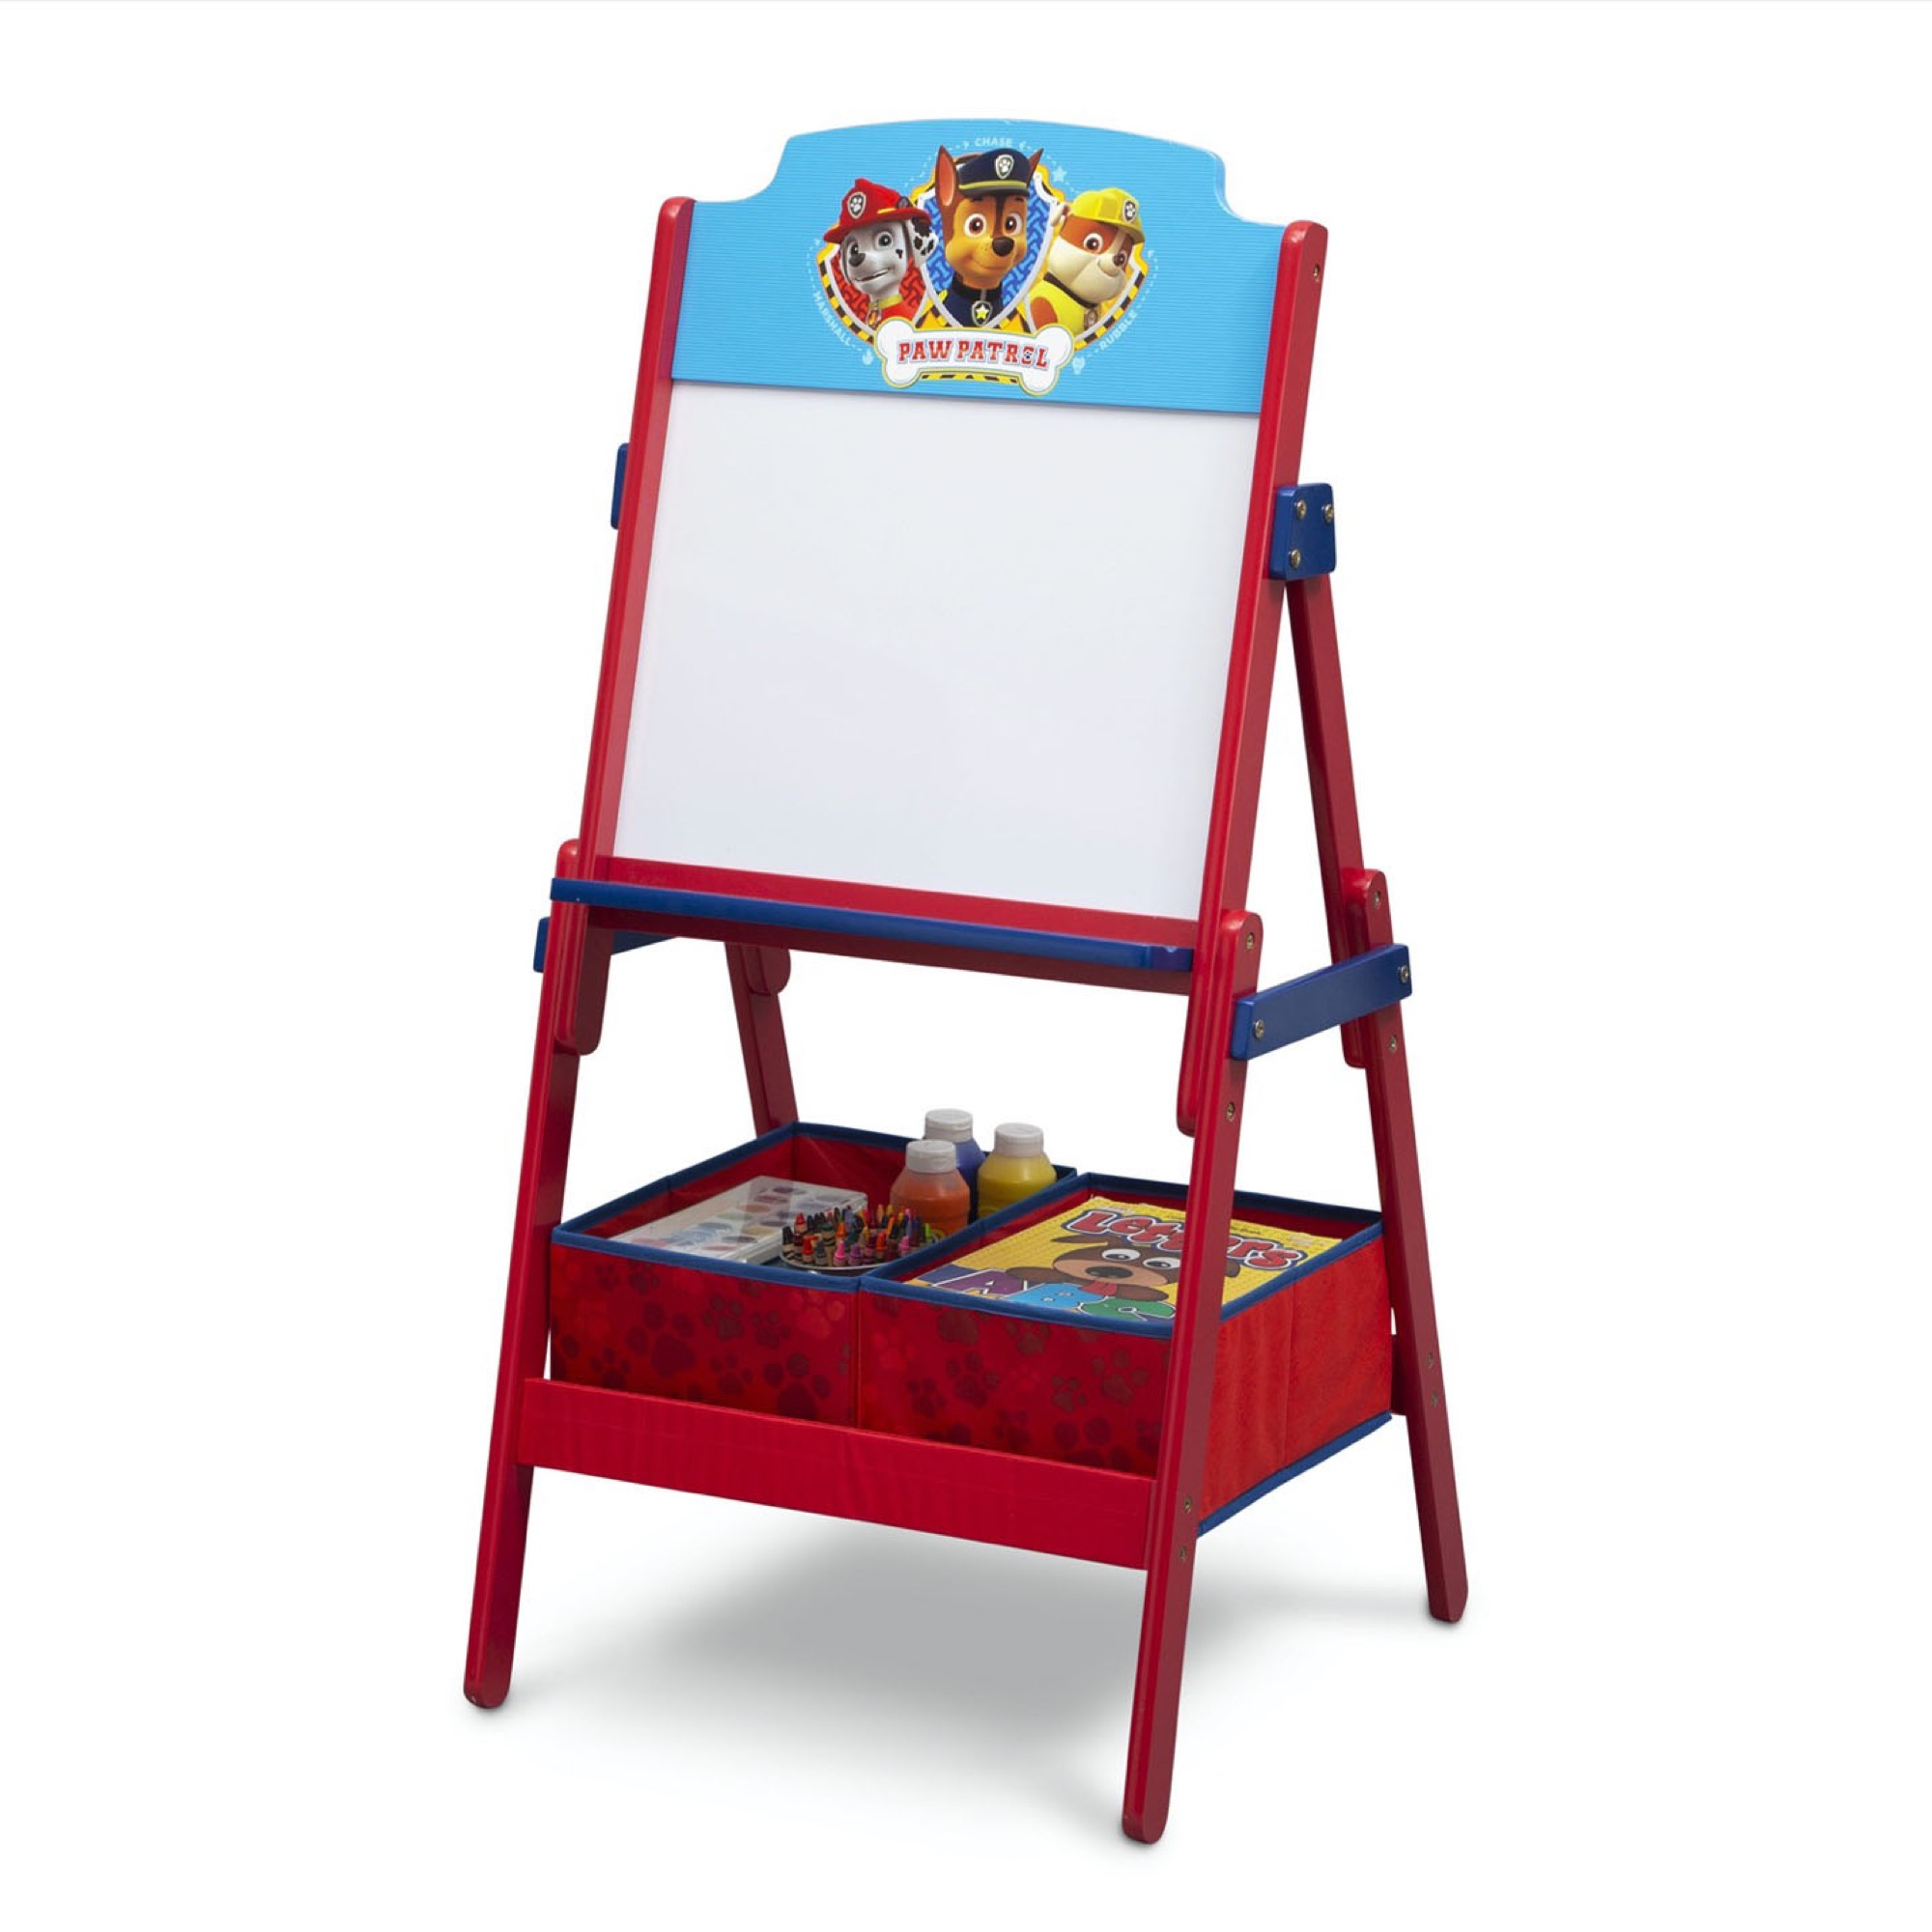 Nick Jr. PAW Patrol Activity Easel with Storage by Delta Children, Greenguard Gold Certified - image 7 of 7